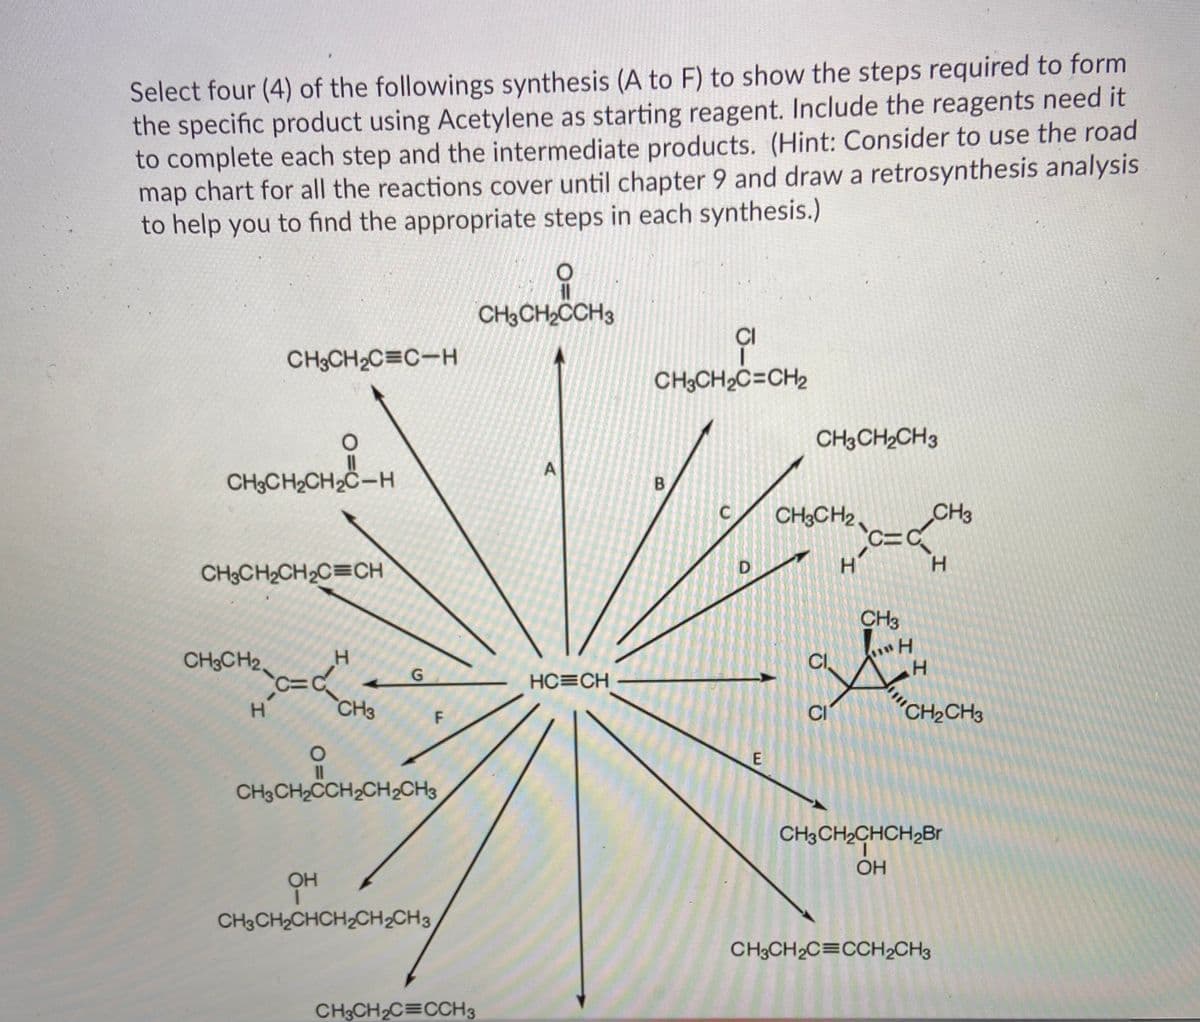 Select four (4) of the followings synthesis (A to F) to show the steps required to form
the specific product using Acetylene as starting reagent. Include the reagents need it
to complete each step and the intermediate products. (Hint: Consider to use the road
map chart for all the reactions cover until chapter 9 and drawa retrosynthesis analysis
to help you to find the appropriate steps in each synthesis.)
CH3CH2CCH3
CH3CH2C=C-H
CI
CH3CH2C=CH2
CH3CH2CH3
CH3CH2CH2Č-H
B
CH3CH2
CH3
C=C
CH3CH2CH2C=CH
D
ター
CH3
CH3CH2
G
CI
HC=CH
ター
CH3
CI
CH,CH3
CH3CH2CCH2CH2CH3
CH3CH2CHCH2B.
OH
OH
CH3CH2CHCH2CH2CH3
CH3CH2C=CCH2CH3
CH3CH2C=CCH3
